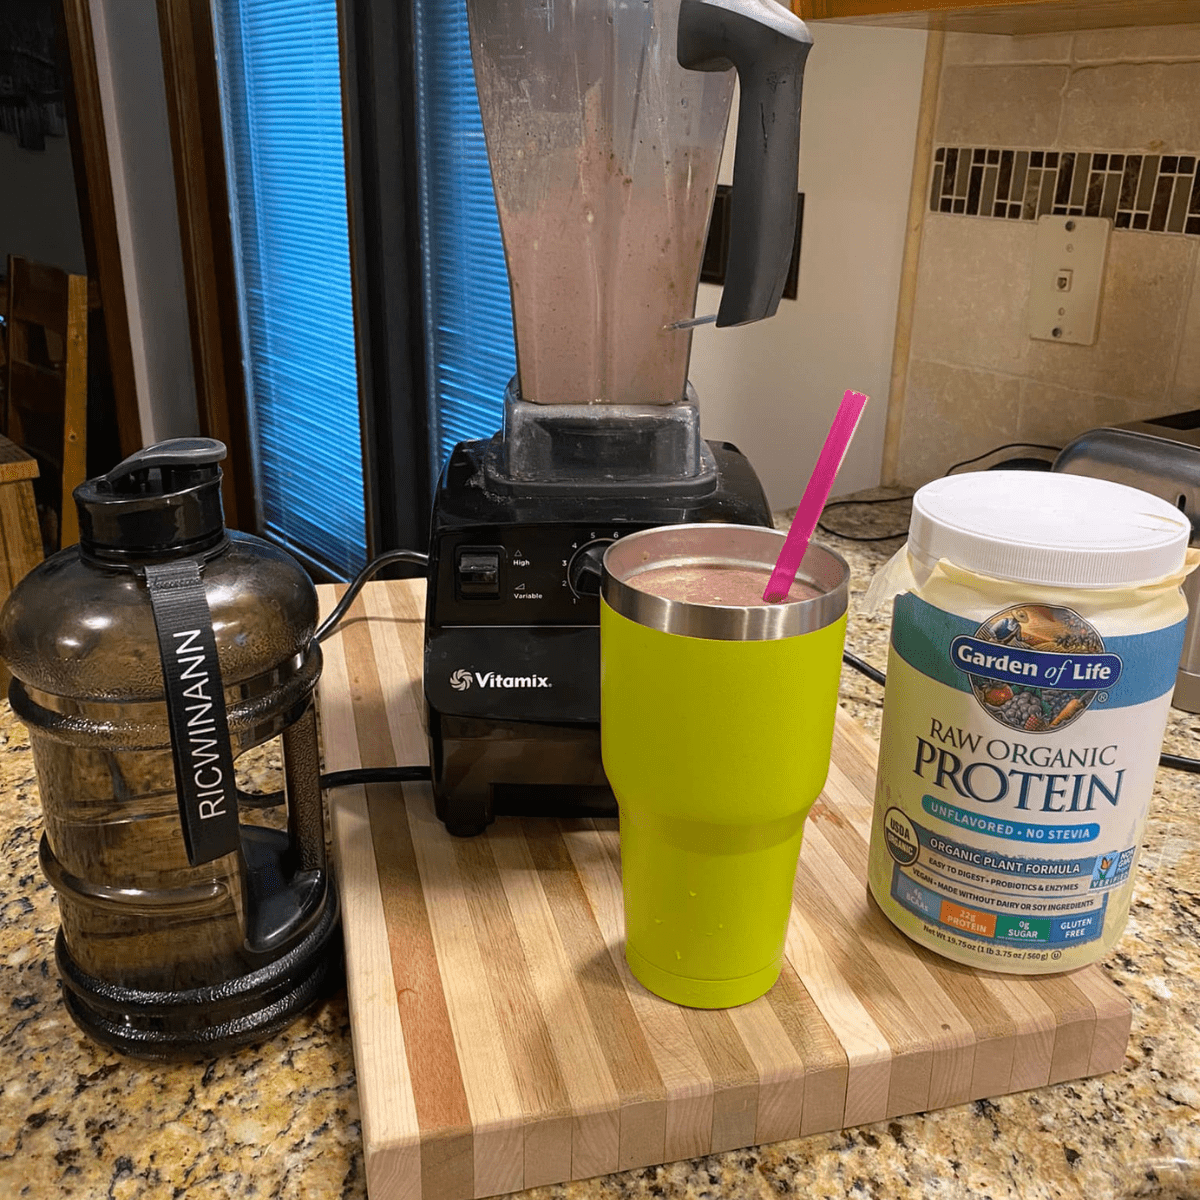 protein powder next to the smootie and blender.